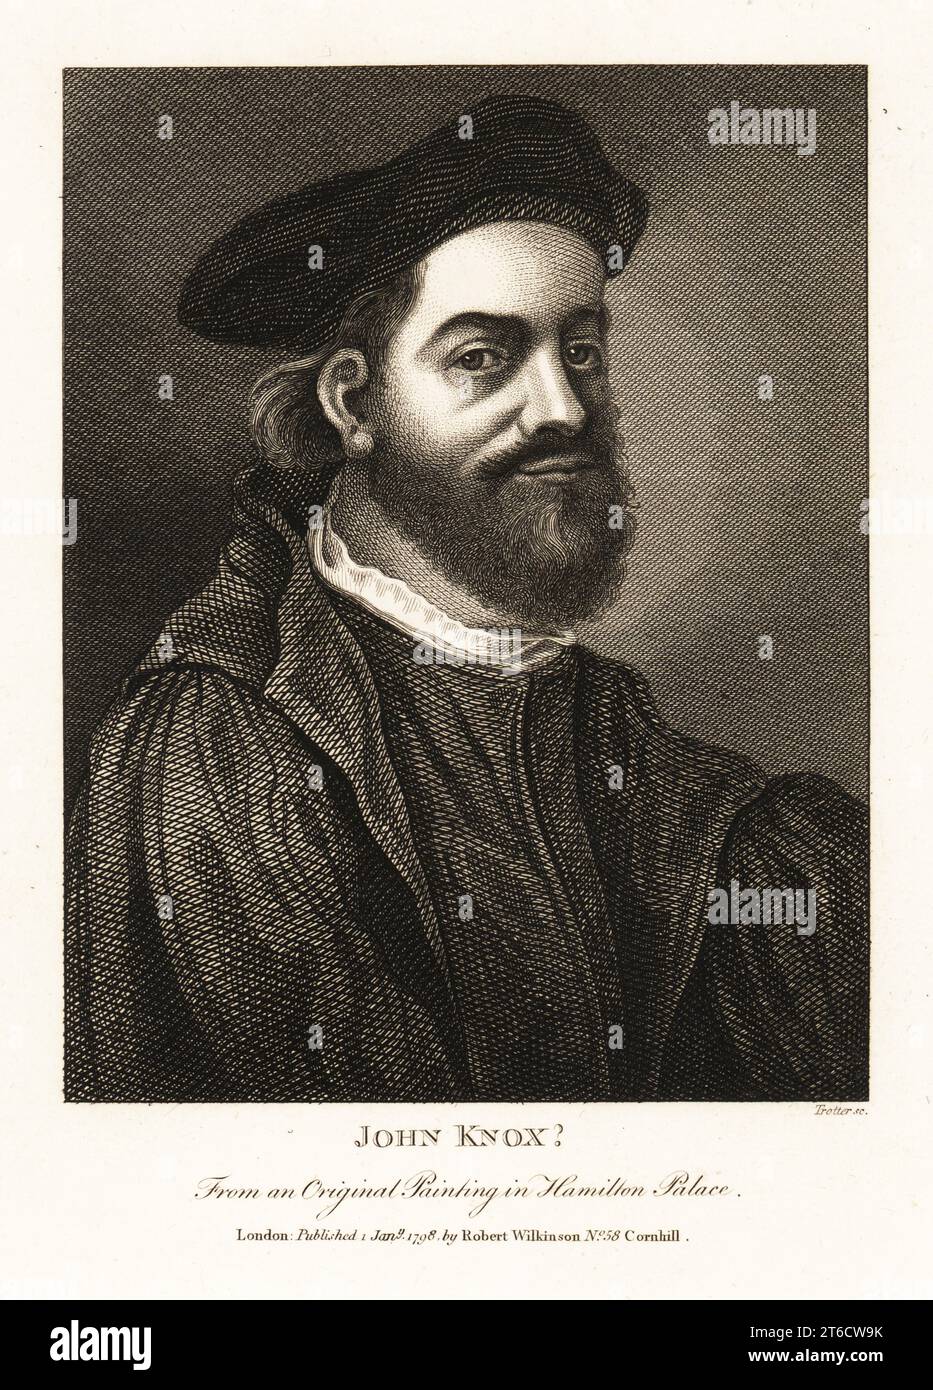 John Knox the younger(?), moderator of the Synod of Mersa in Germany, preacher at Rotterdam, author of the History of the Reformation of Religion within the Realme of Scotland, 1581. From an original painting in Hamilton Palace. Copperplate engraving by Thomas Trotter from John Smiths Iconographia Scotica, or portraits of illustrious persons of Scotland, Robert Wilkinson, 58 Cornhill, London, 1798. Stock Photo